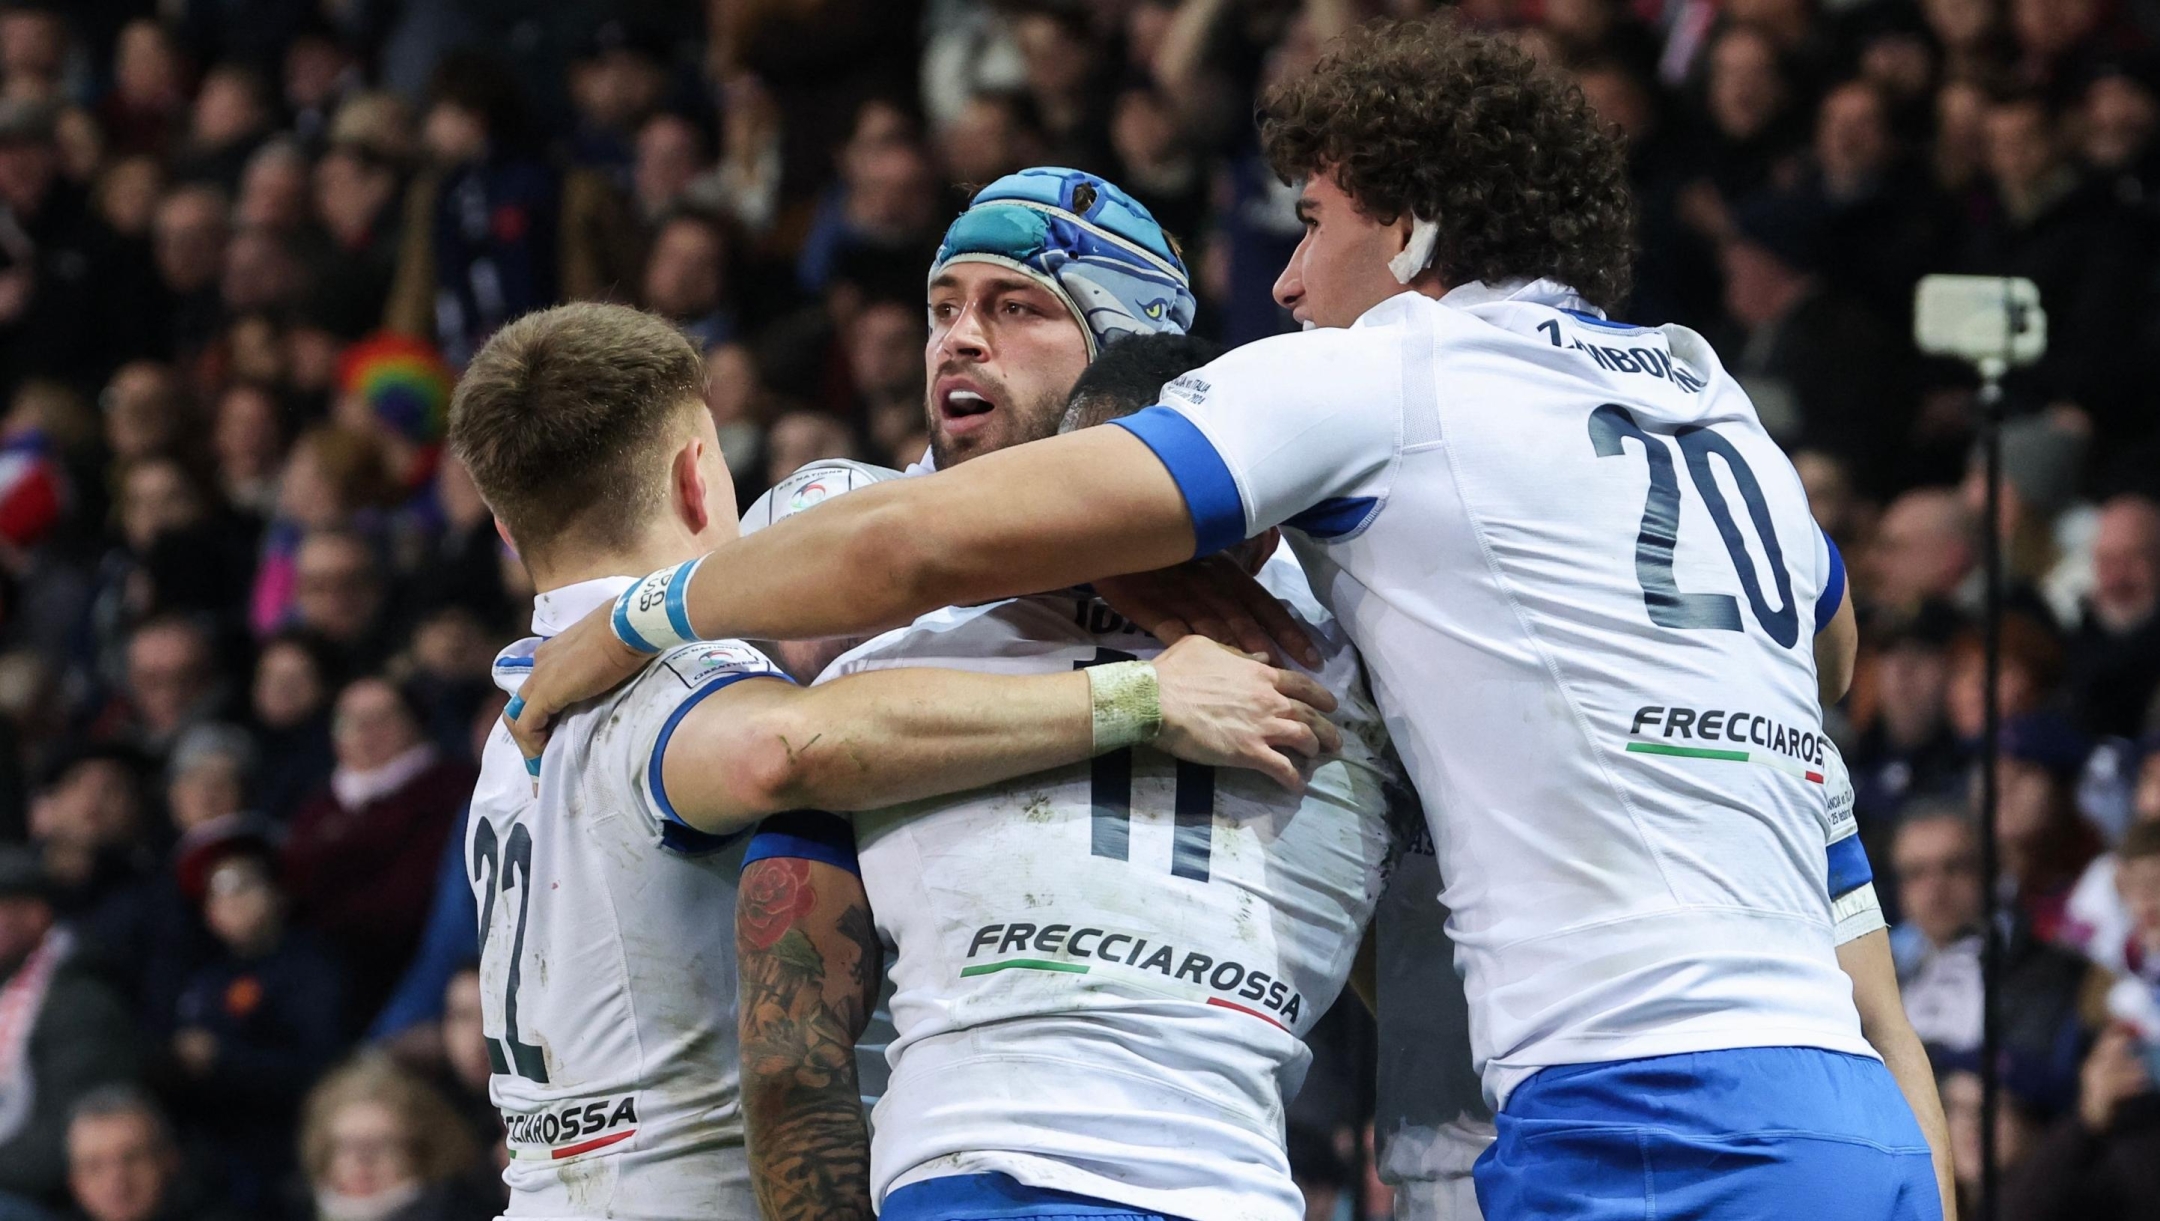 Italy's players celebrate after scoring a try during the Six Nations rugby union international match between France and Italy at Stade Pierre Mauroy in Villeneuve-d'Ascq, near Lille, northern France, on February 25, 2024. (Photo by Denis Charlet / AFP)